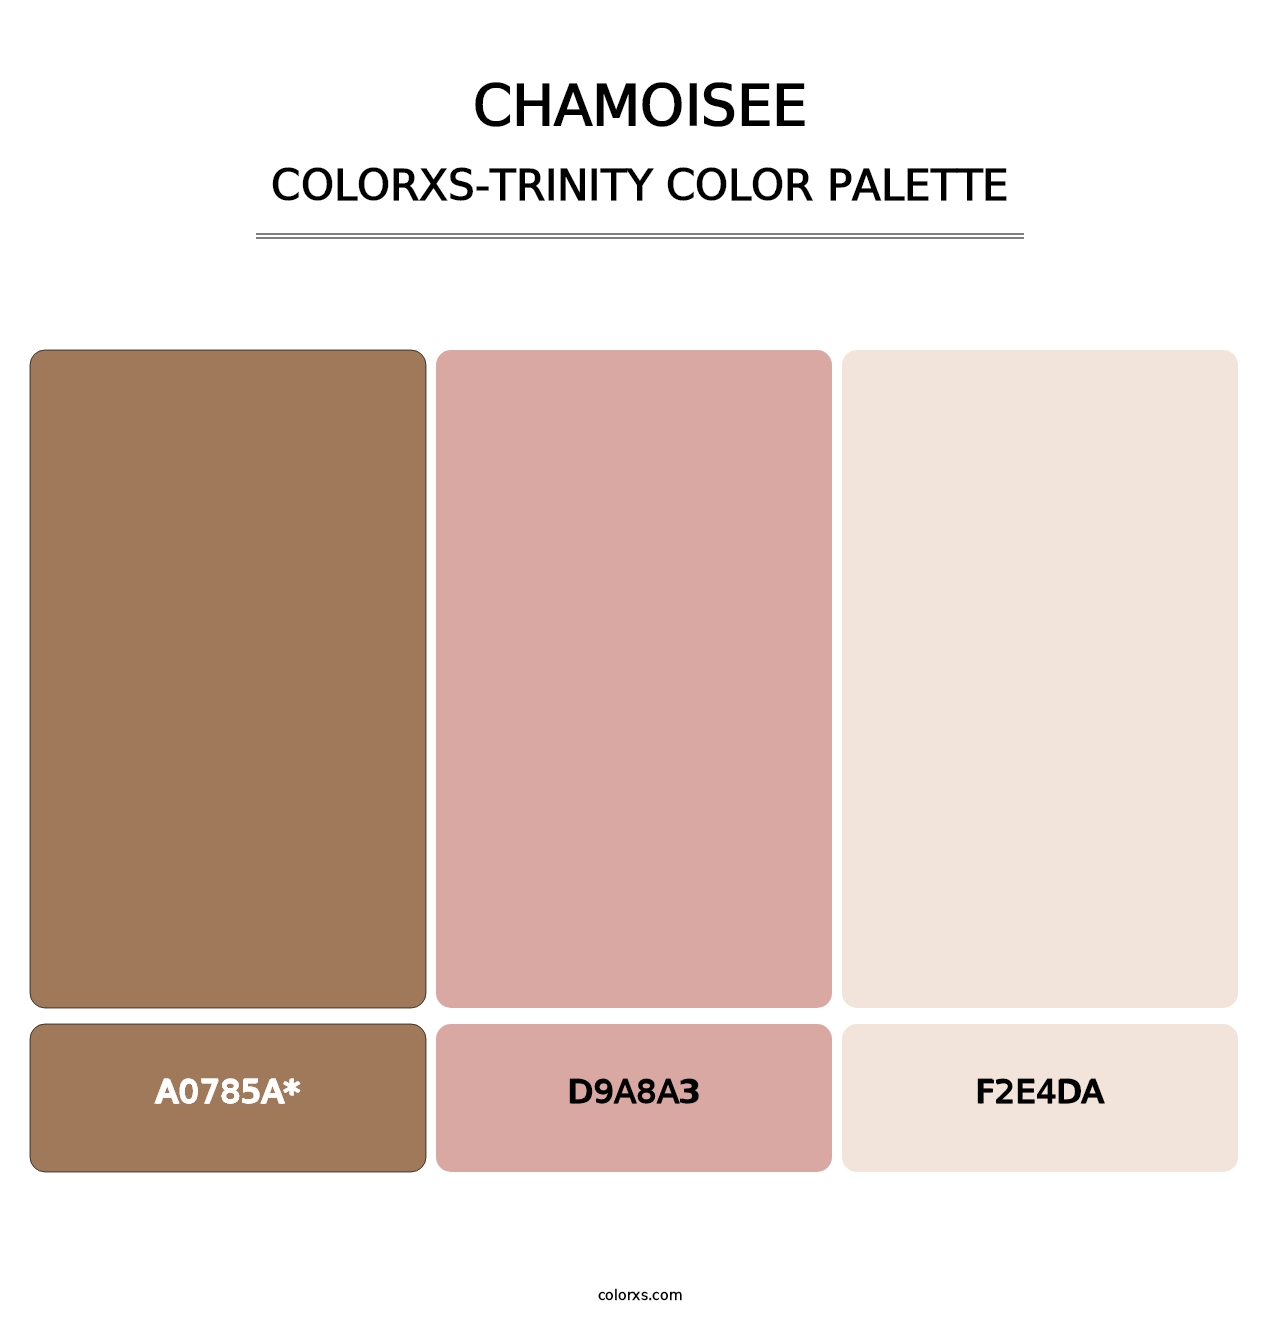 Chamoisee - Colorxs Trinity Palette